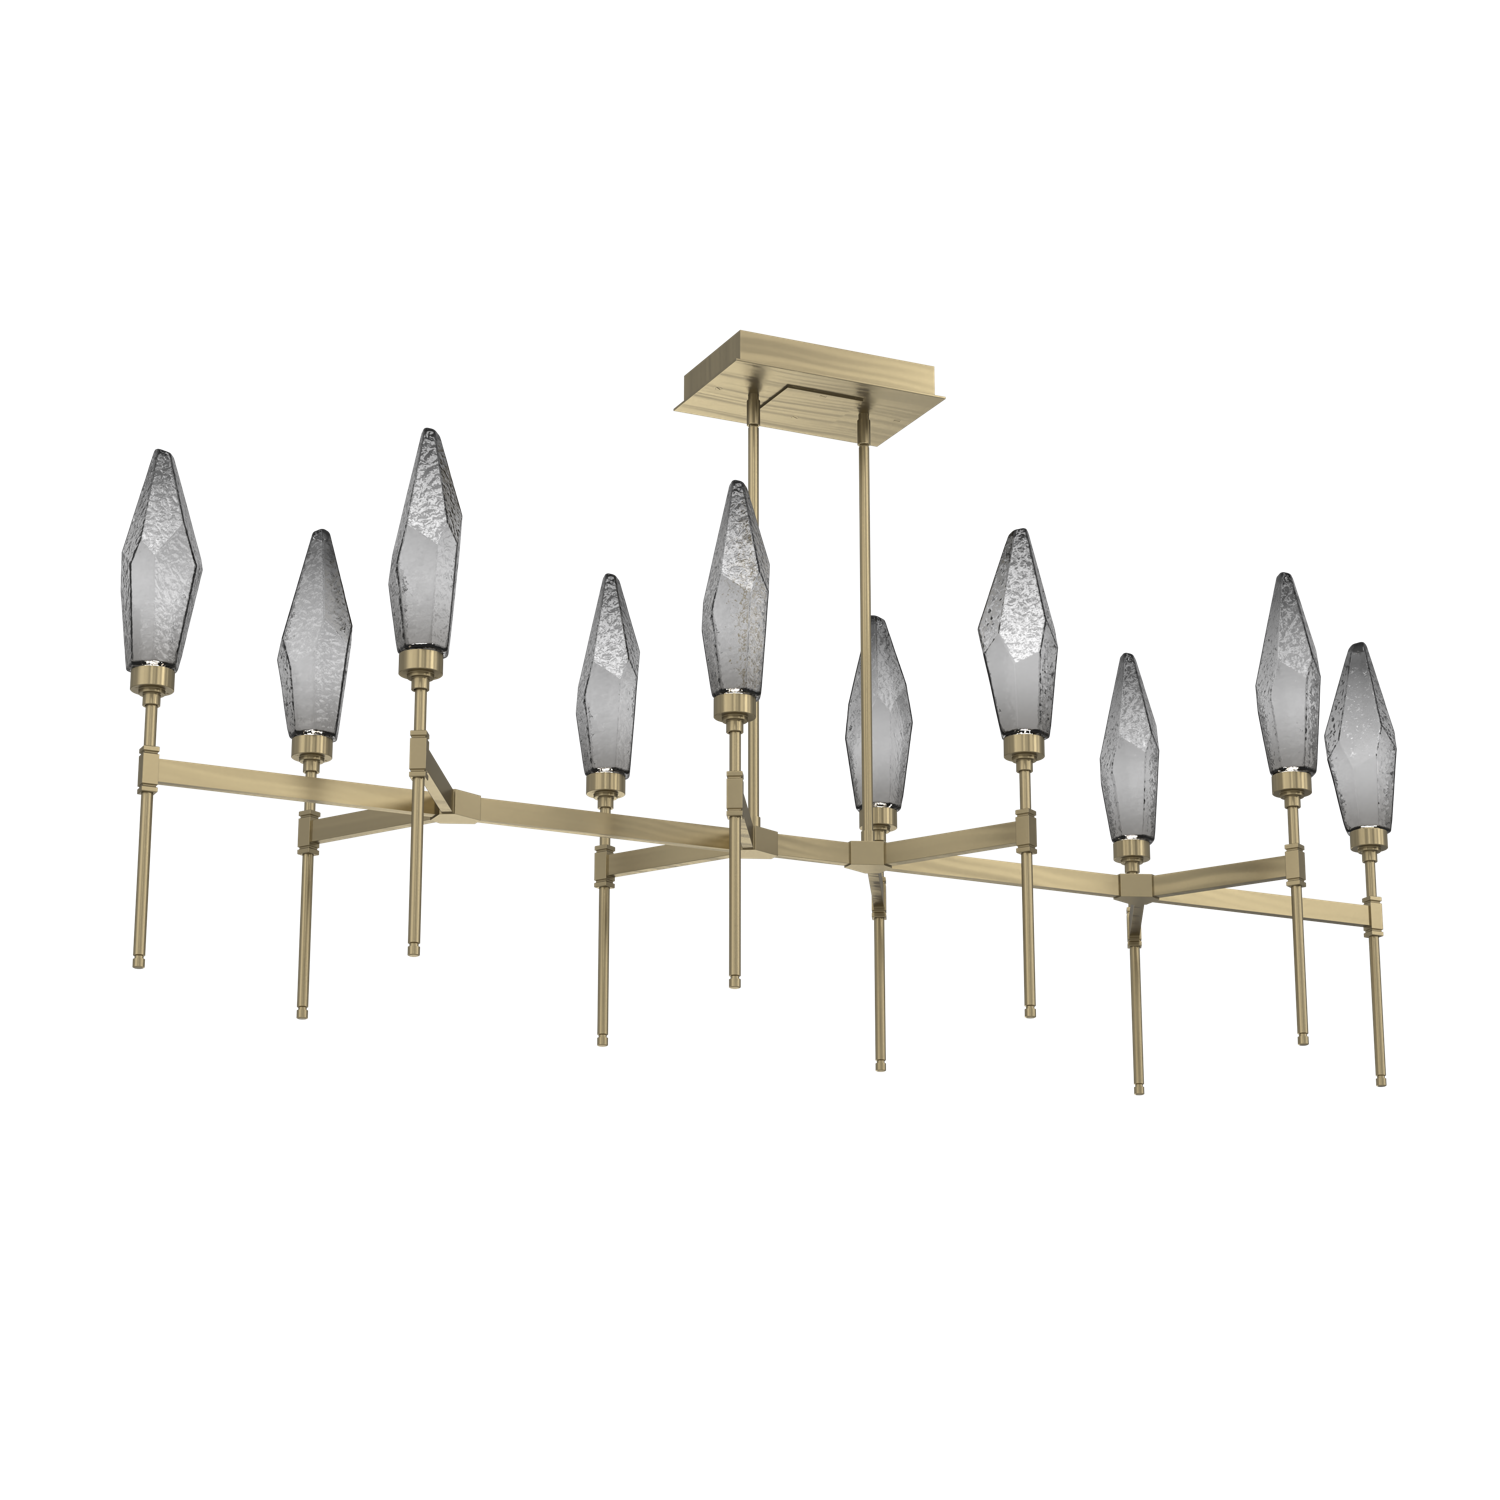 PLB0050-67-HB-CS-Hammerton-Studio-Rock-Crystal-67-inch-linear-belvedere-chandelier-with-heritage-brass-finish-and-chilled-smoke-glass-shades-and-LED-lamping